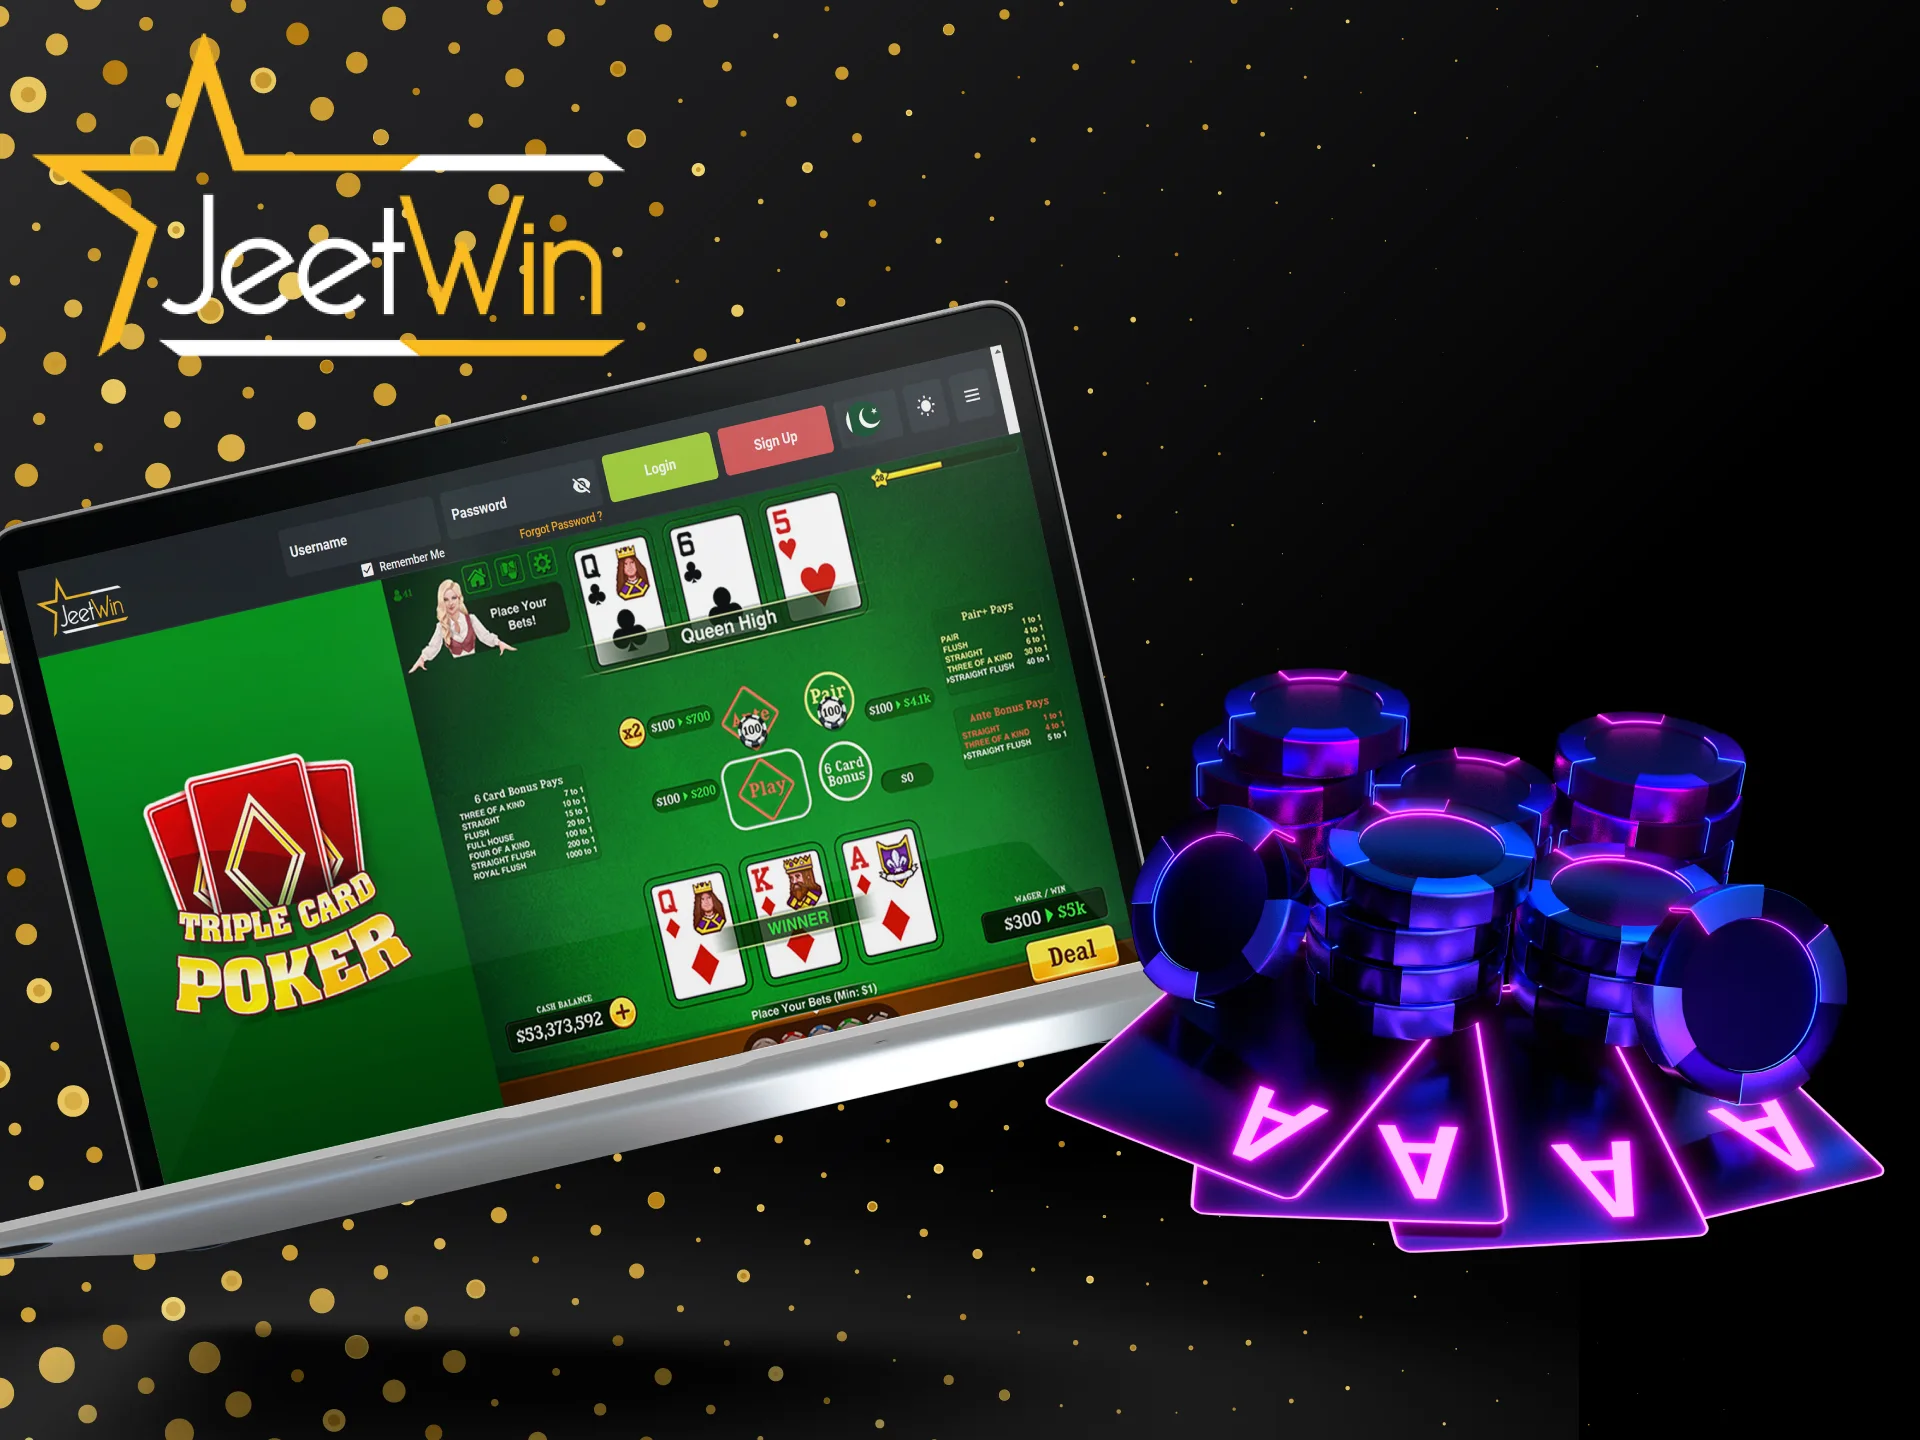 Play Triple Card Poker at JeetWin and beat the dealers.